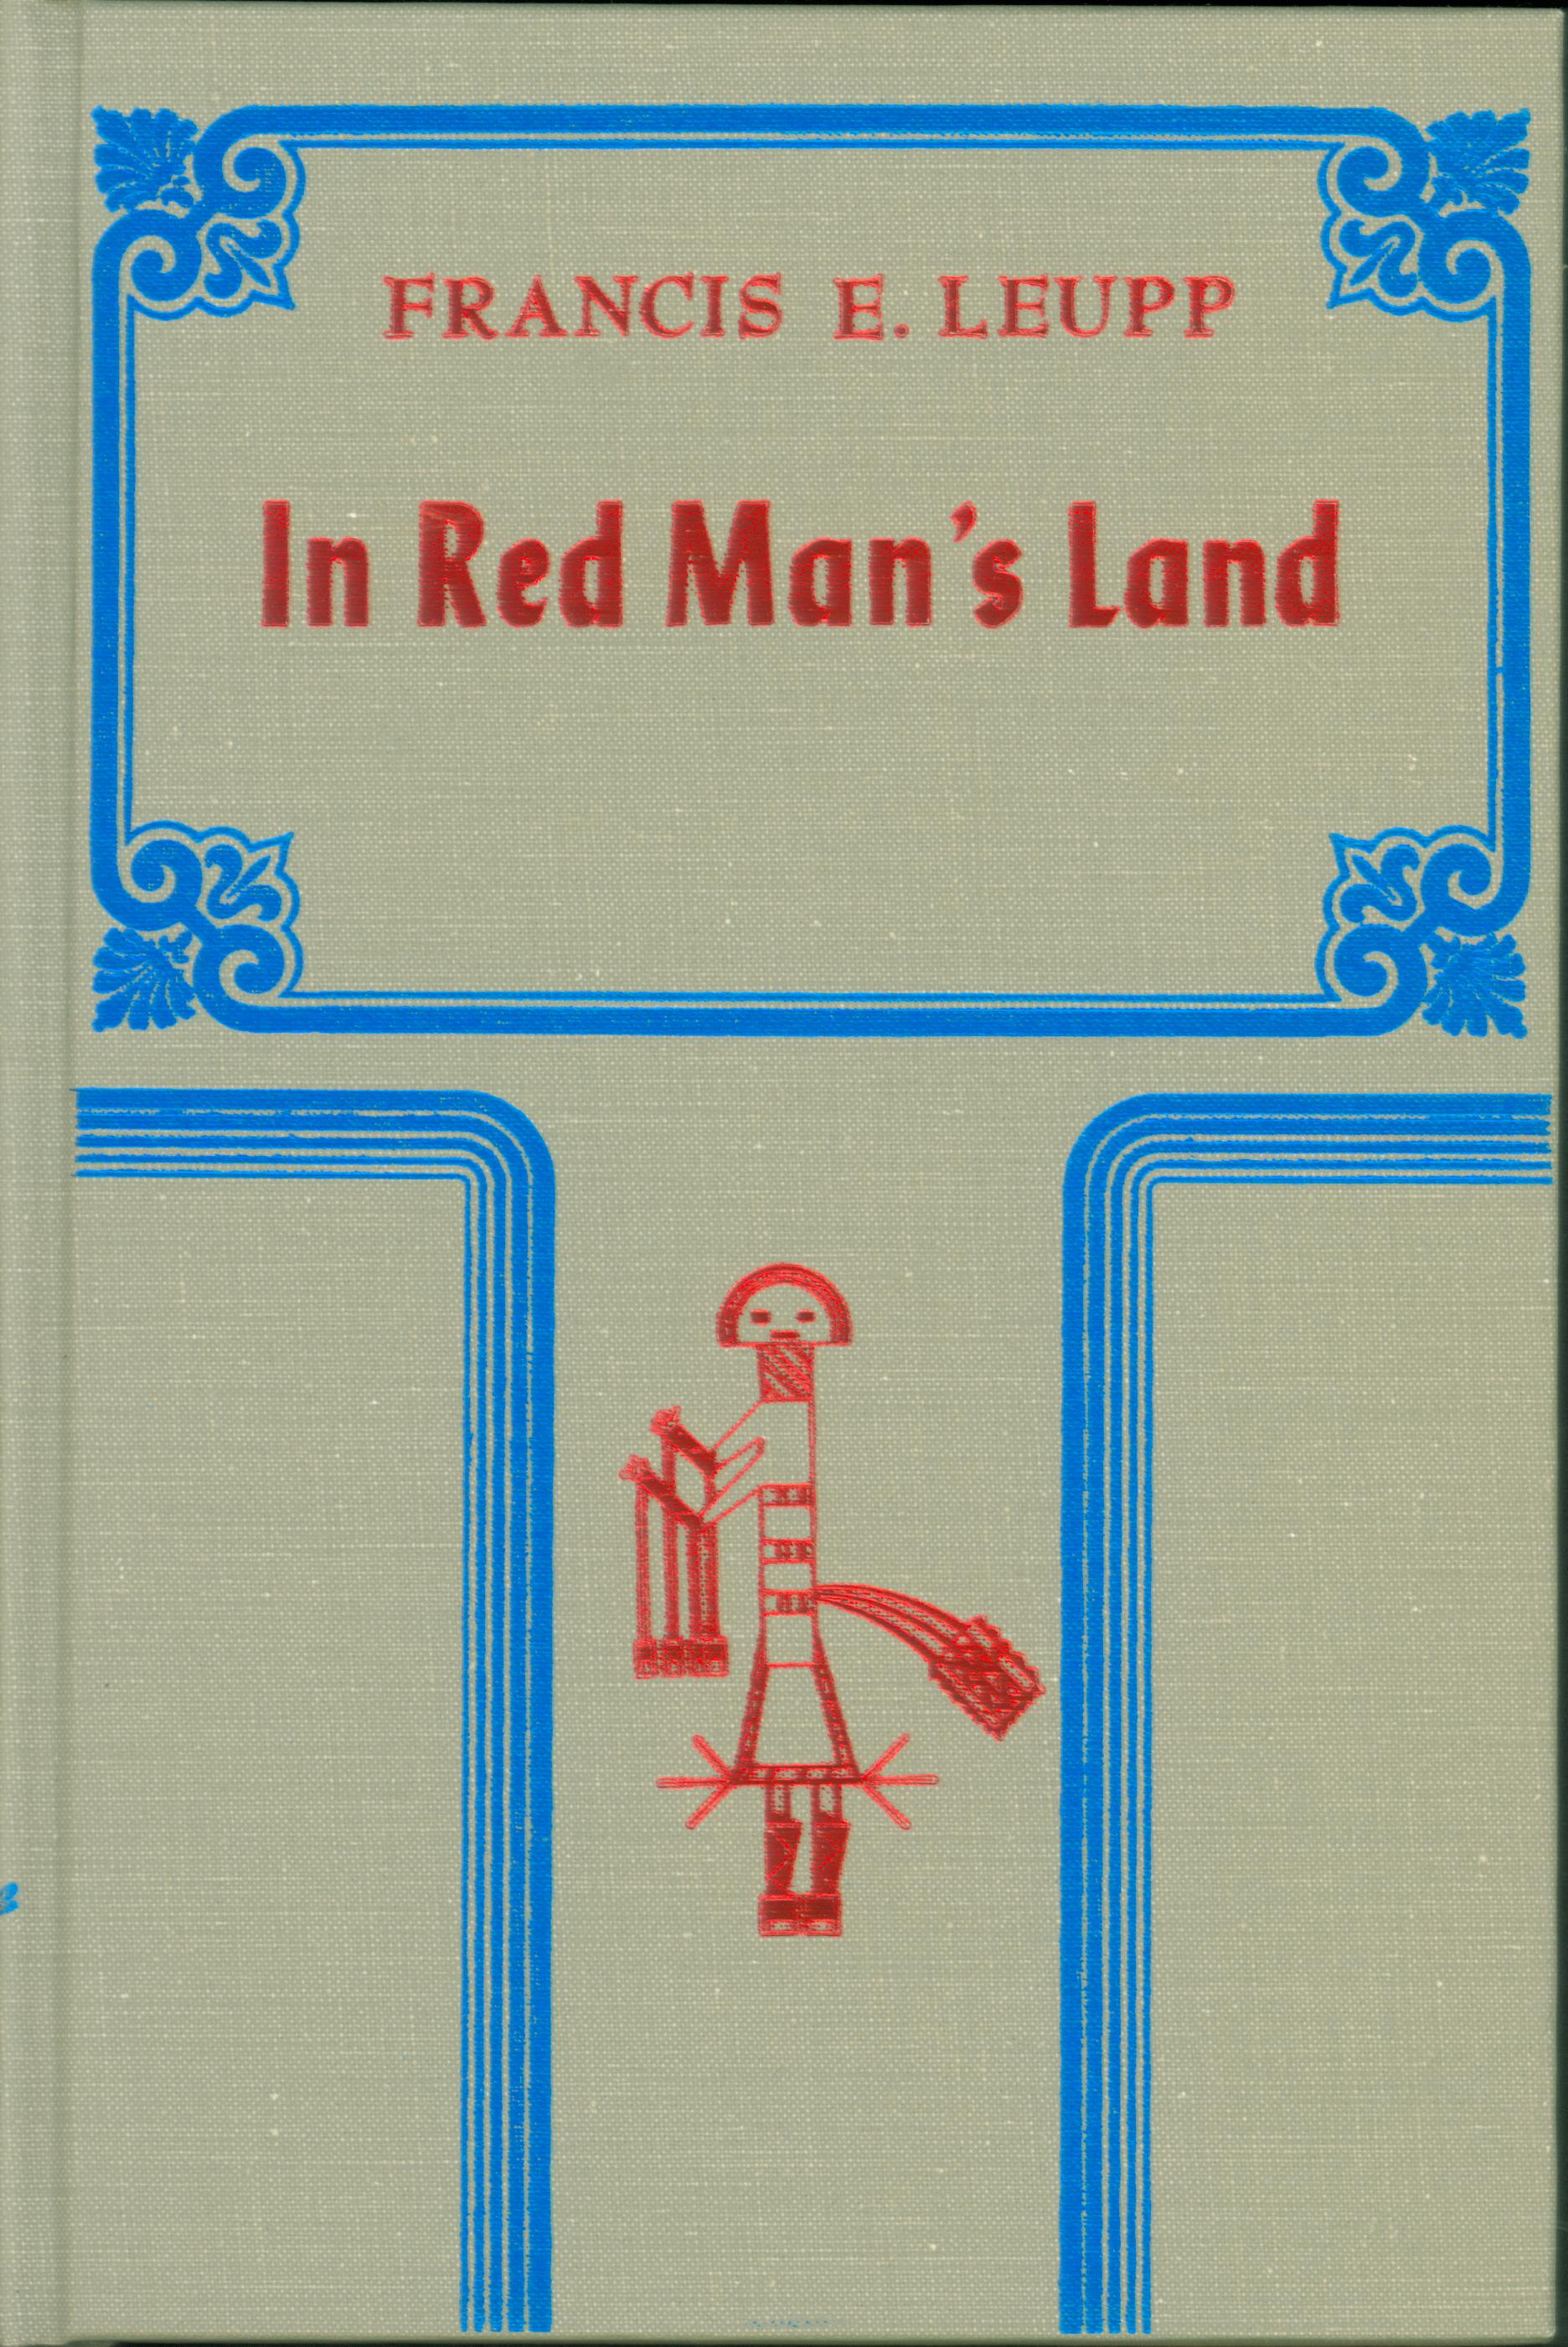 IN RED MAN'S LAND: a study of the American Indian.